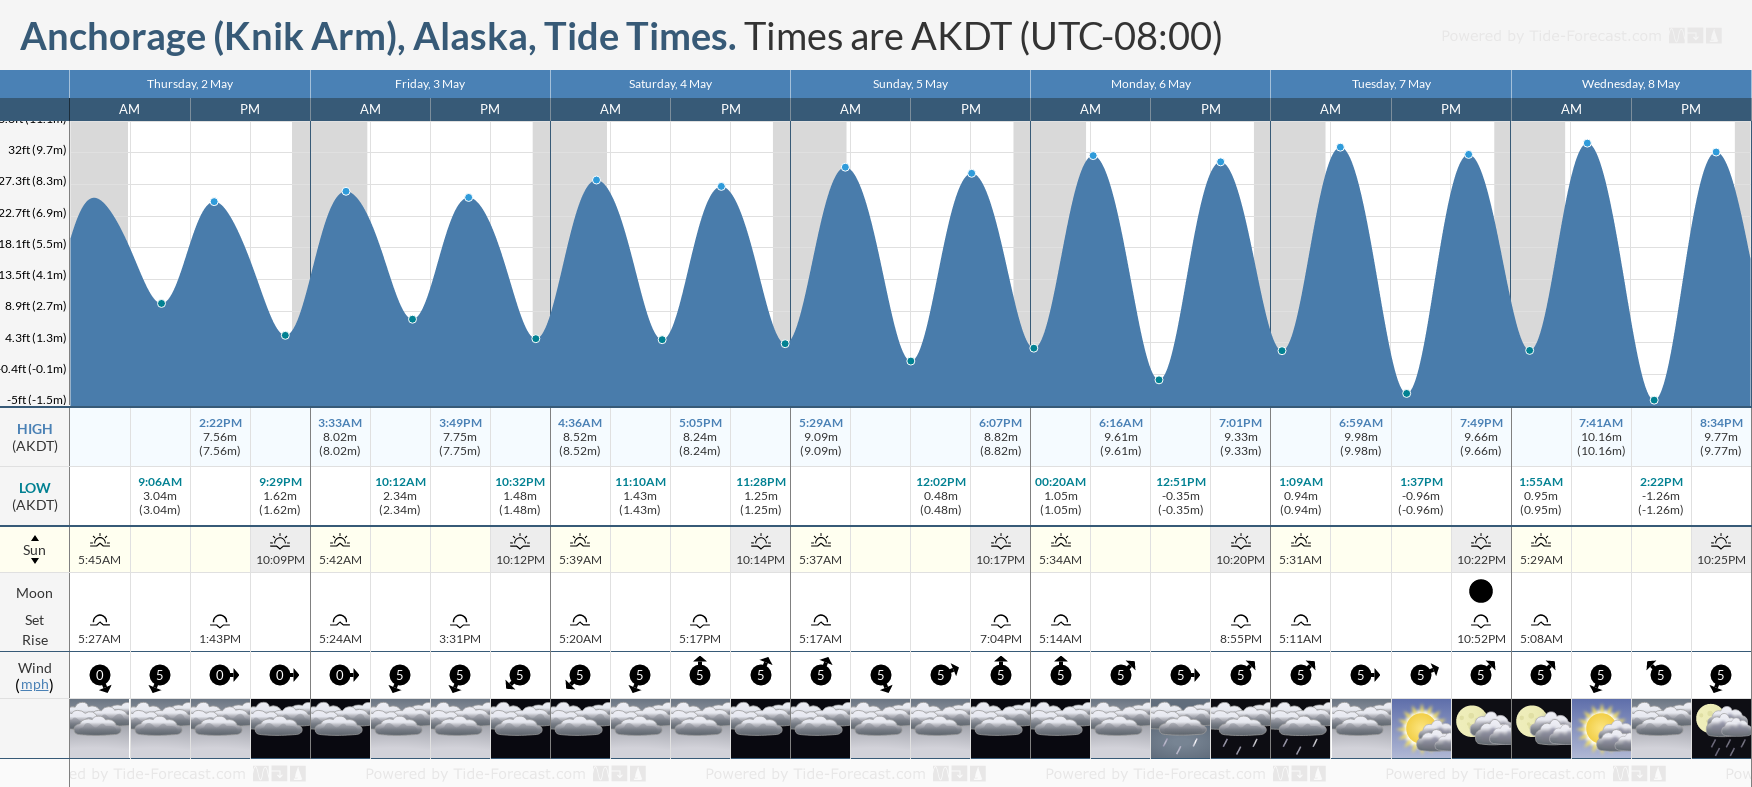 Anchorage (Knik Arm), Alaska Tide Chart including high and low tide tide times for the next 7 days